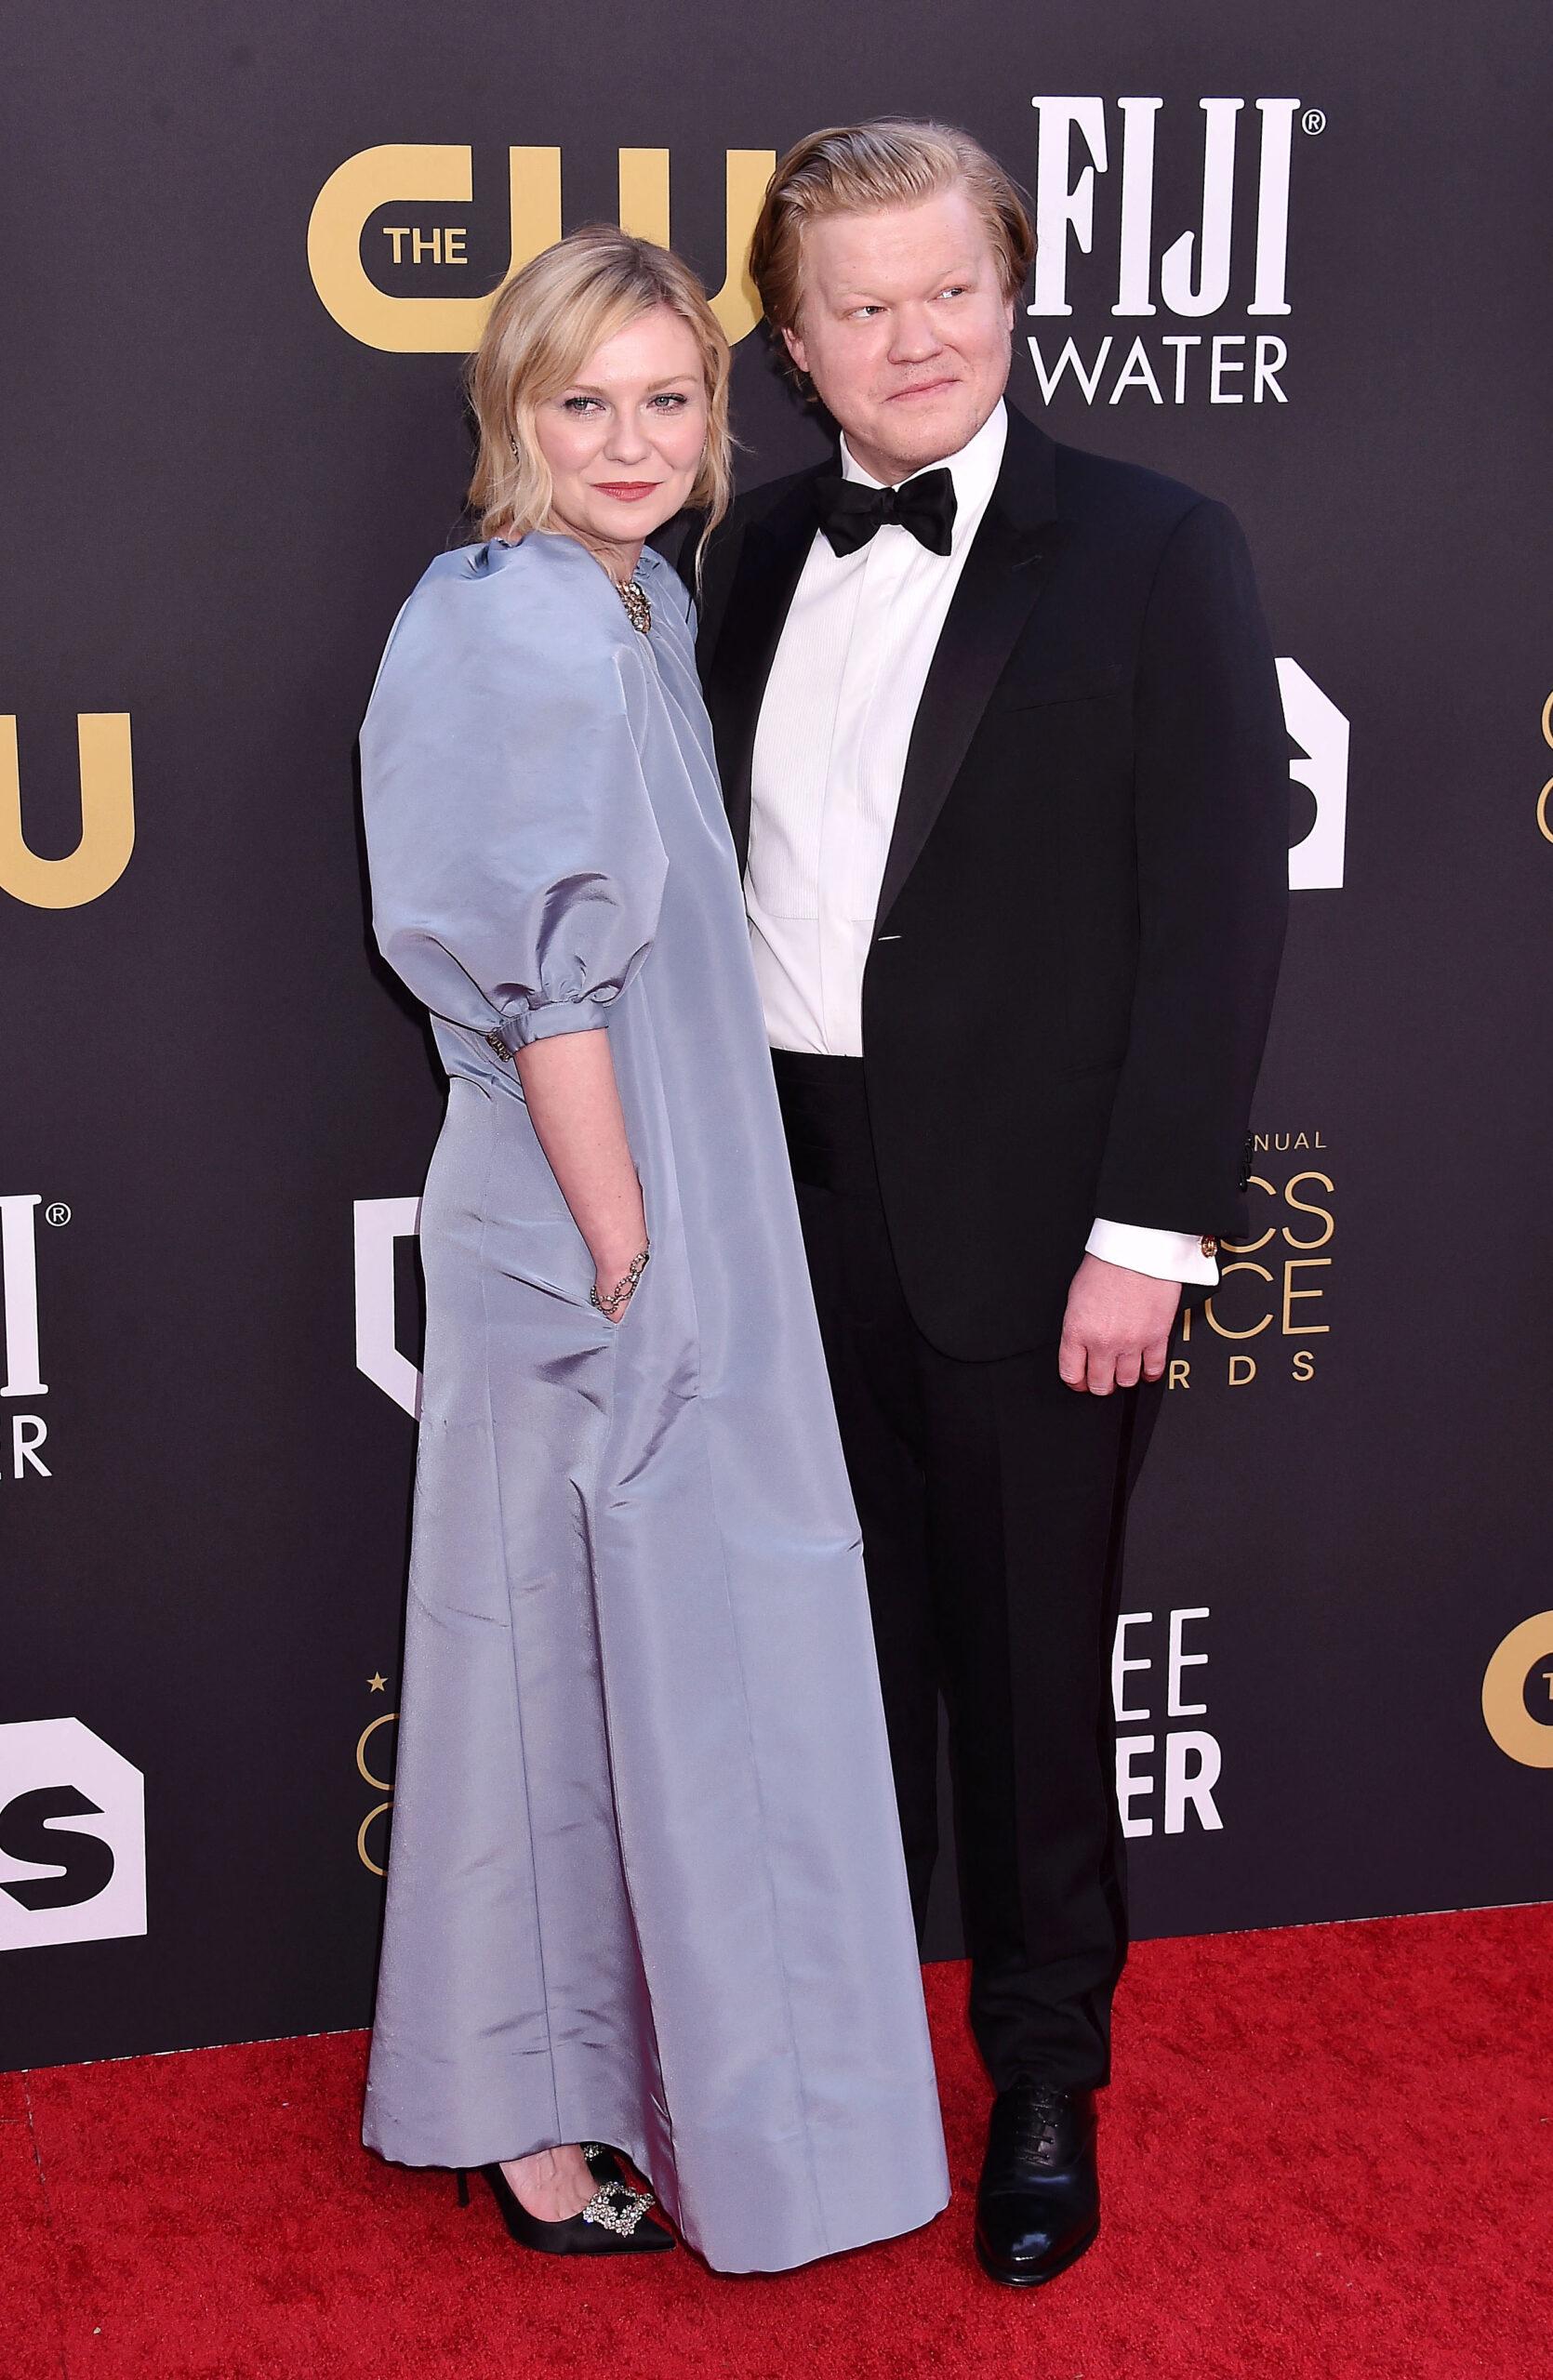 Kirsten Dunst (L) and Jesse Plemons at the 27th Annual Critics Choice Awards - Arrivals